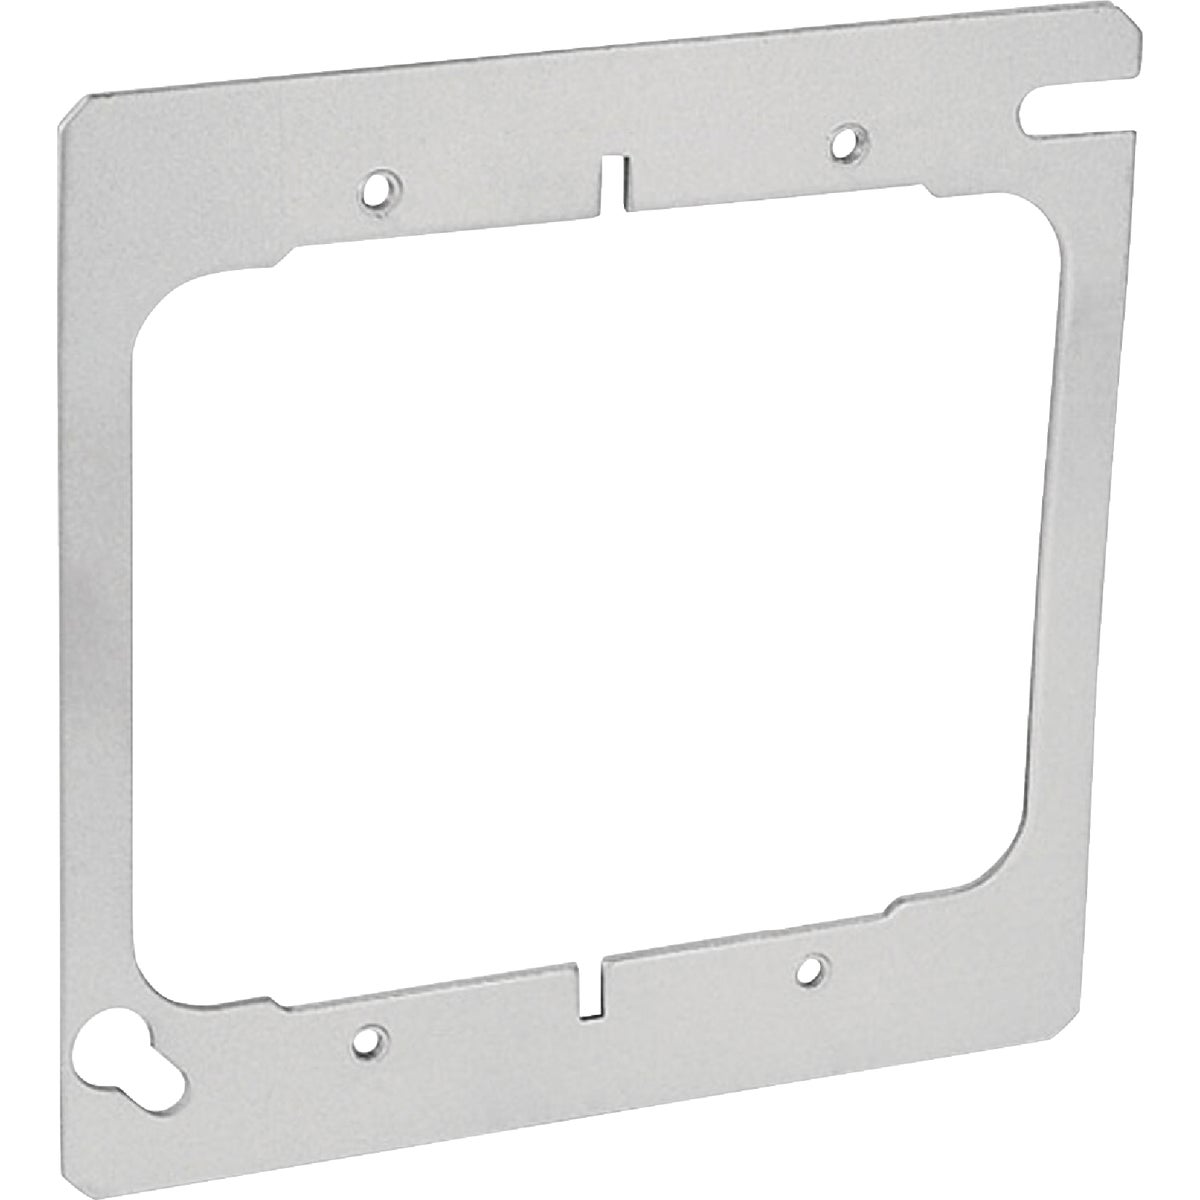 Item 501611, Square 2-gang device ring. Used with 4-inch square boxes.